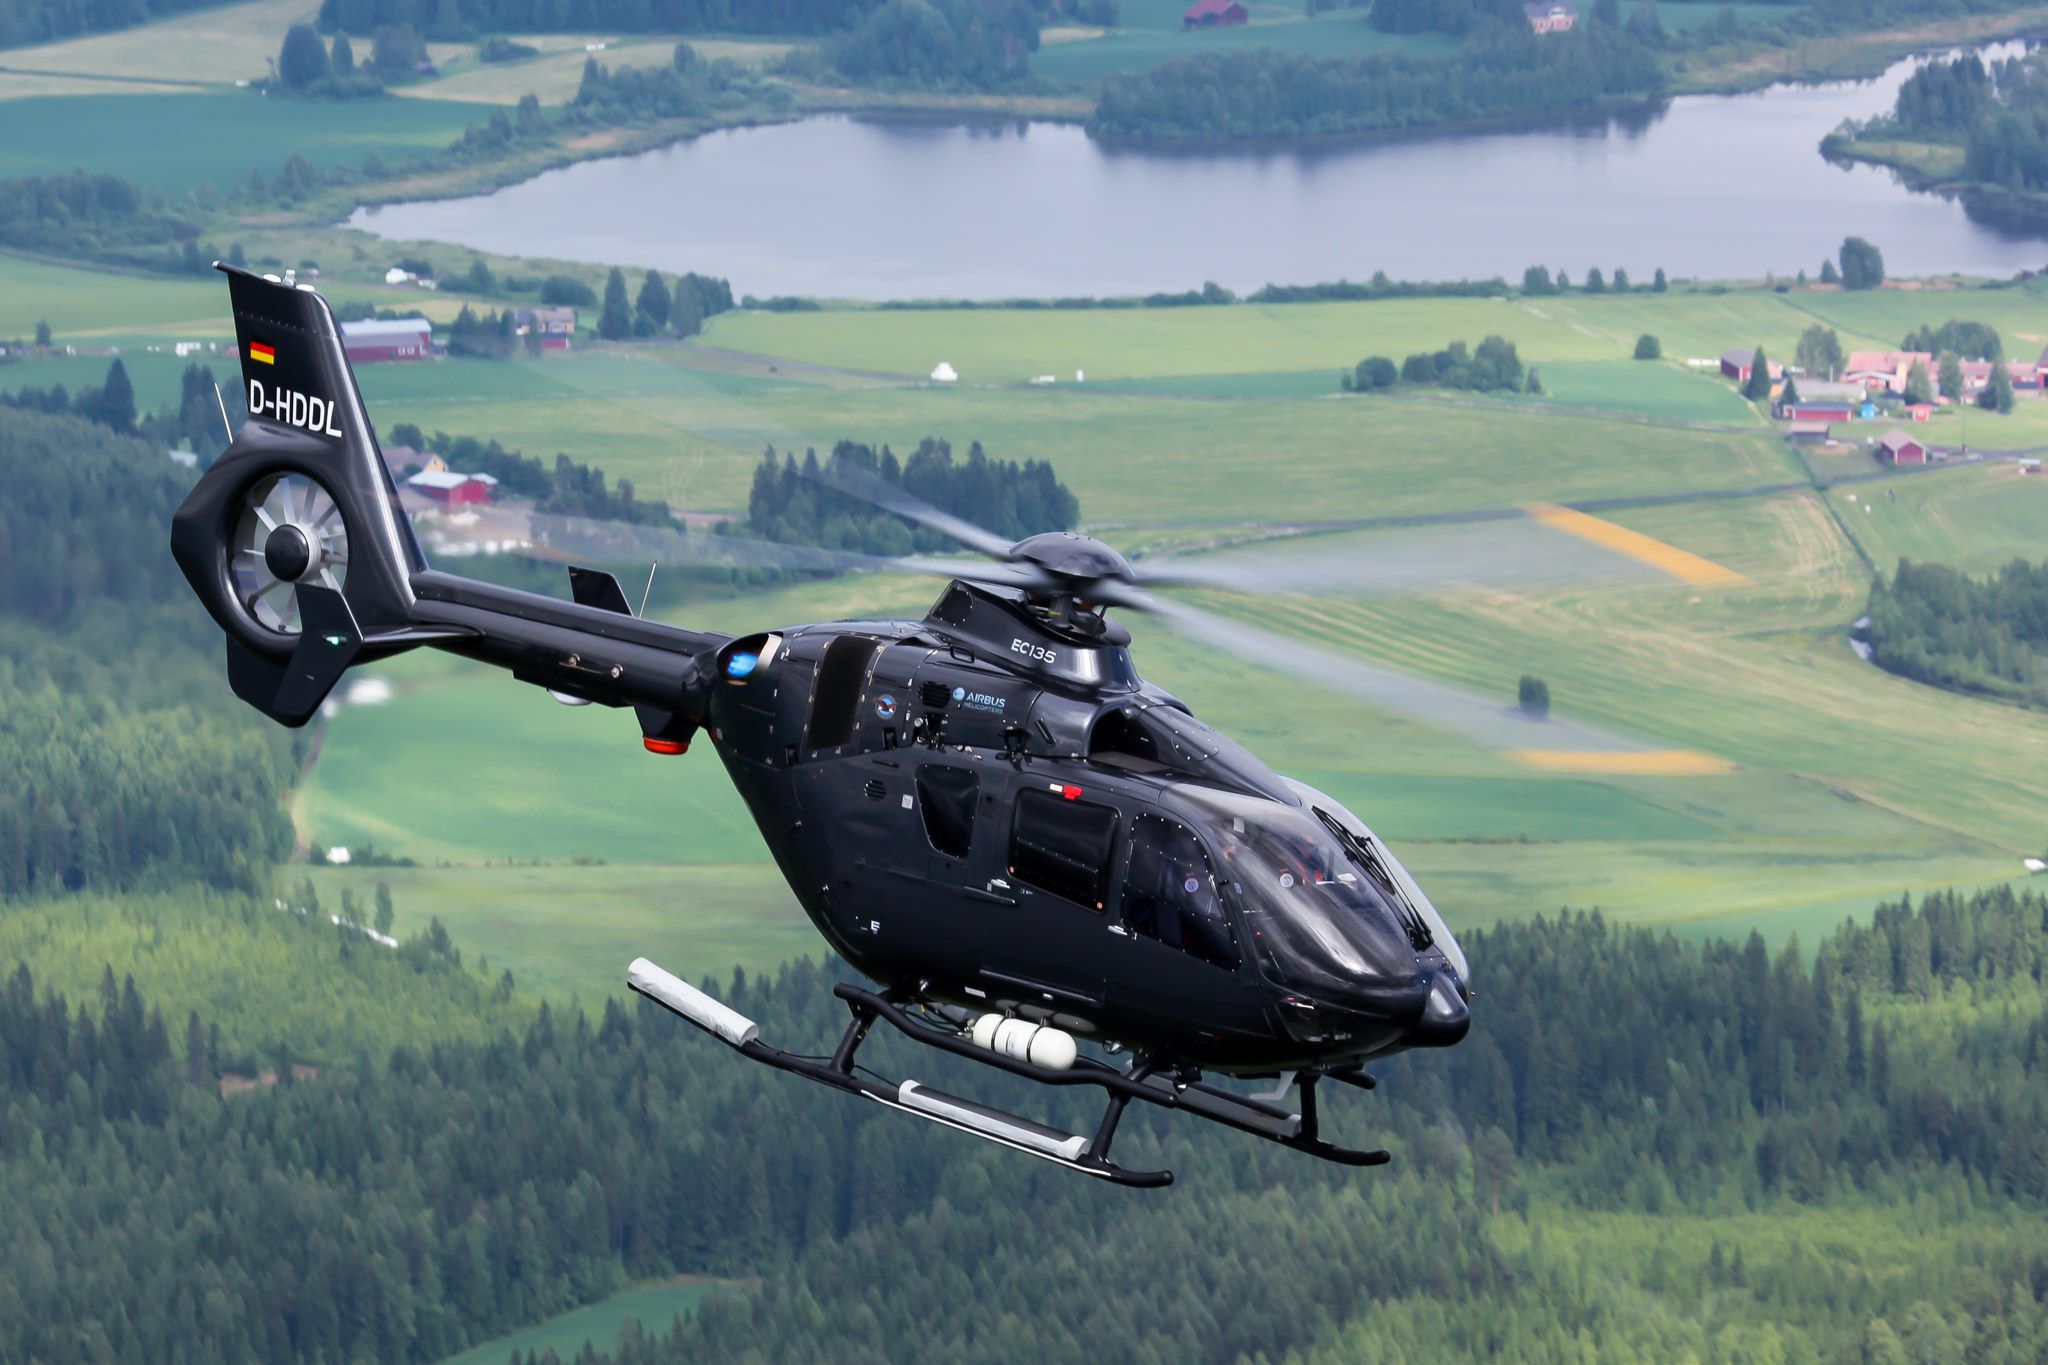 eurocopter EC135 HD Wallpapers and Backgrounds 2050x1370